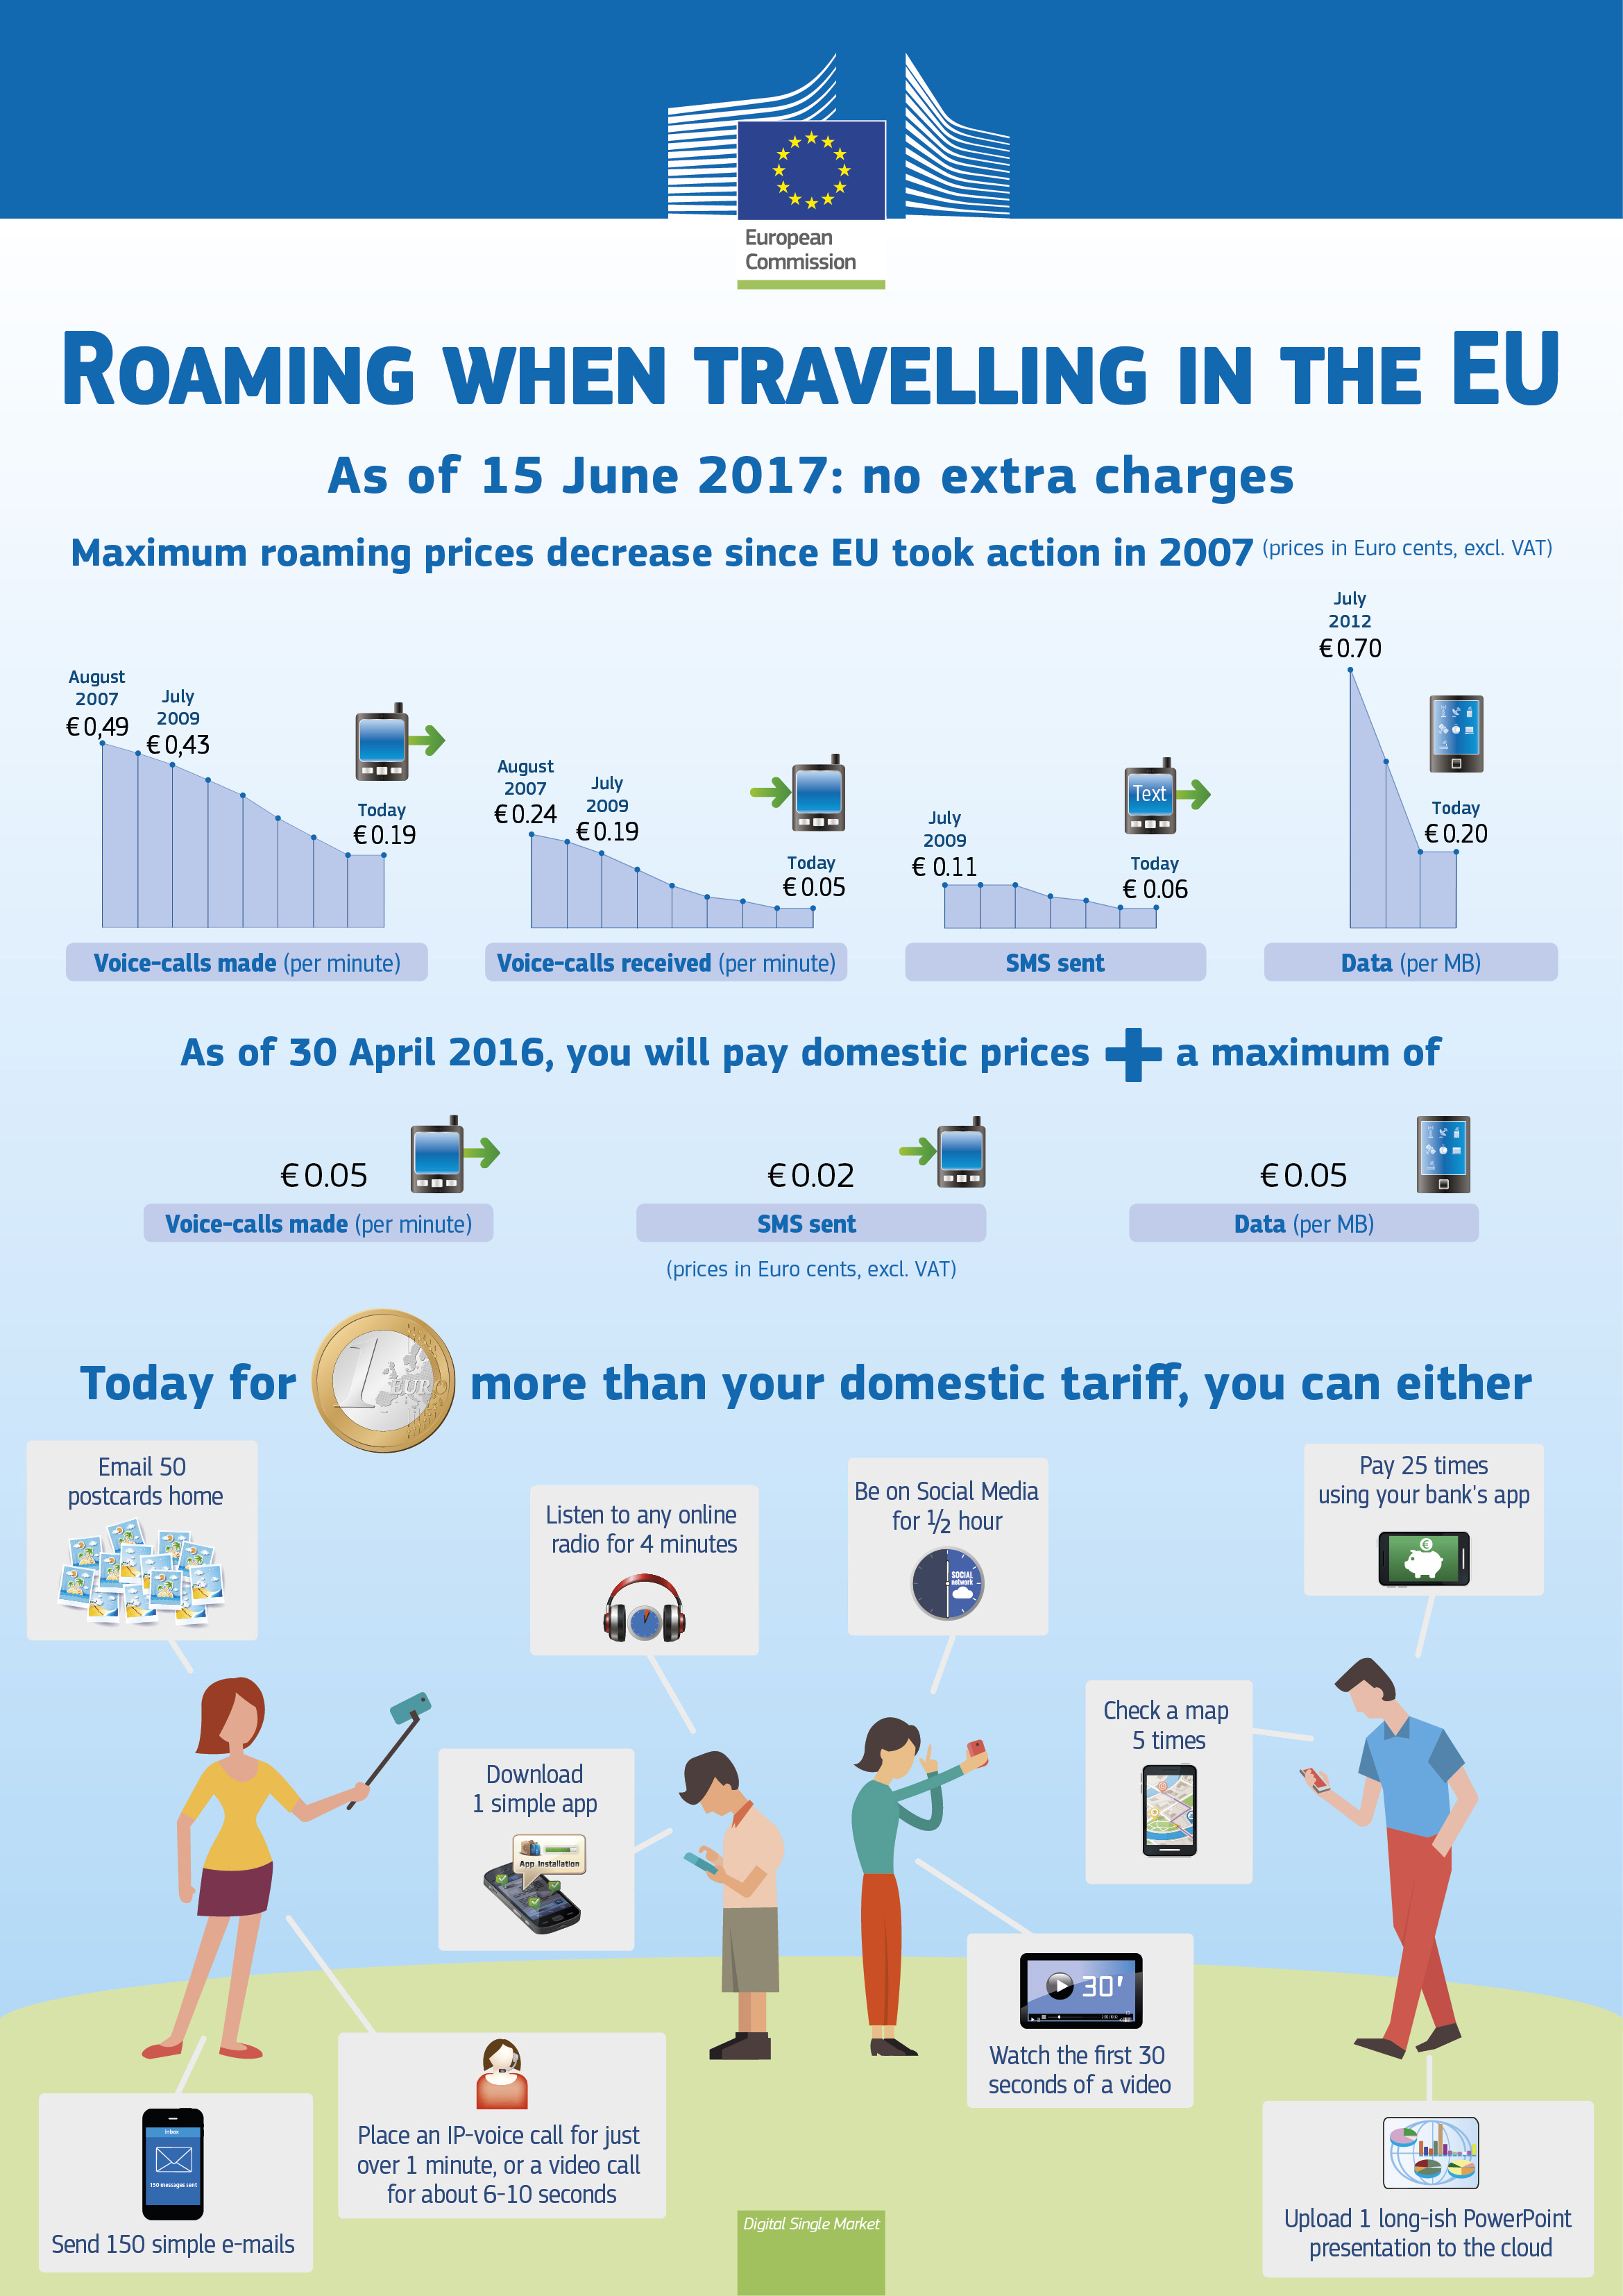 The infographic describes the roaming charges in Europe starting in 2016